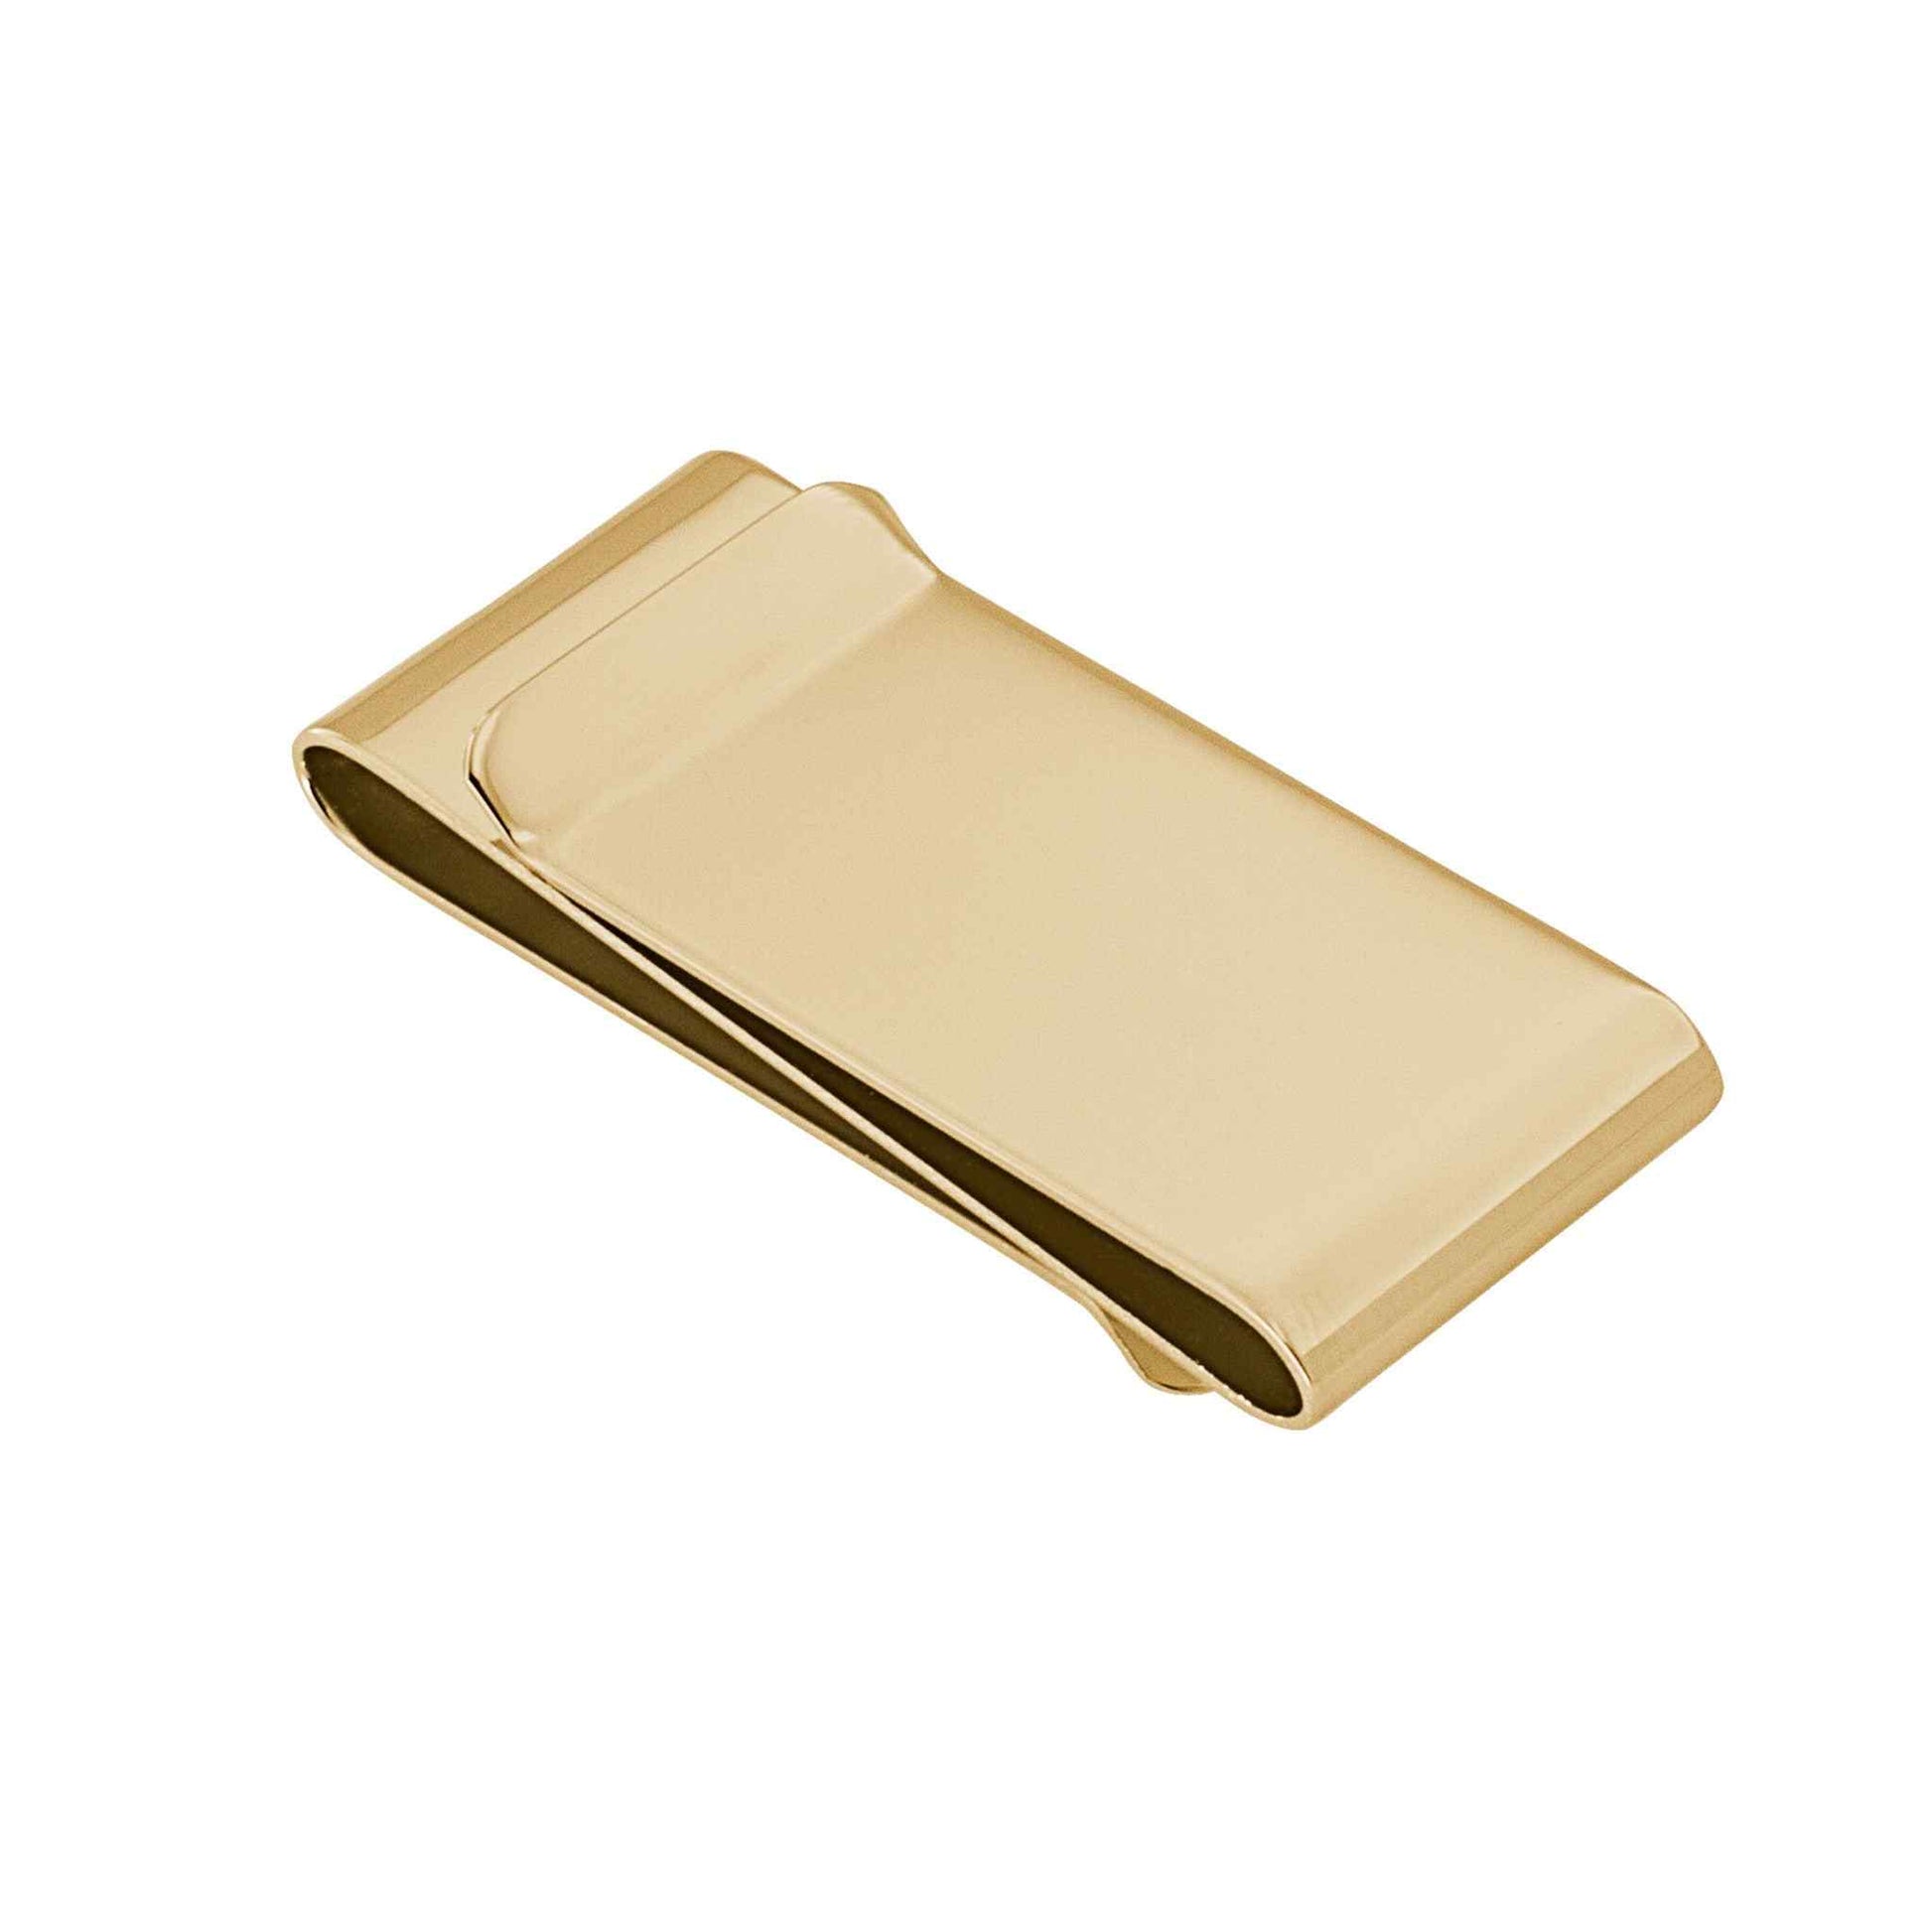 A polished double fold money clip displayed on a neutral white background.